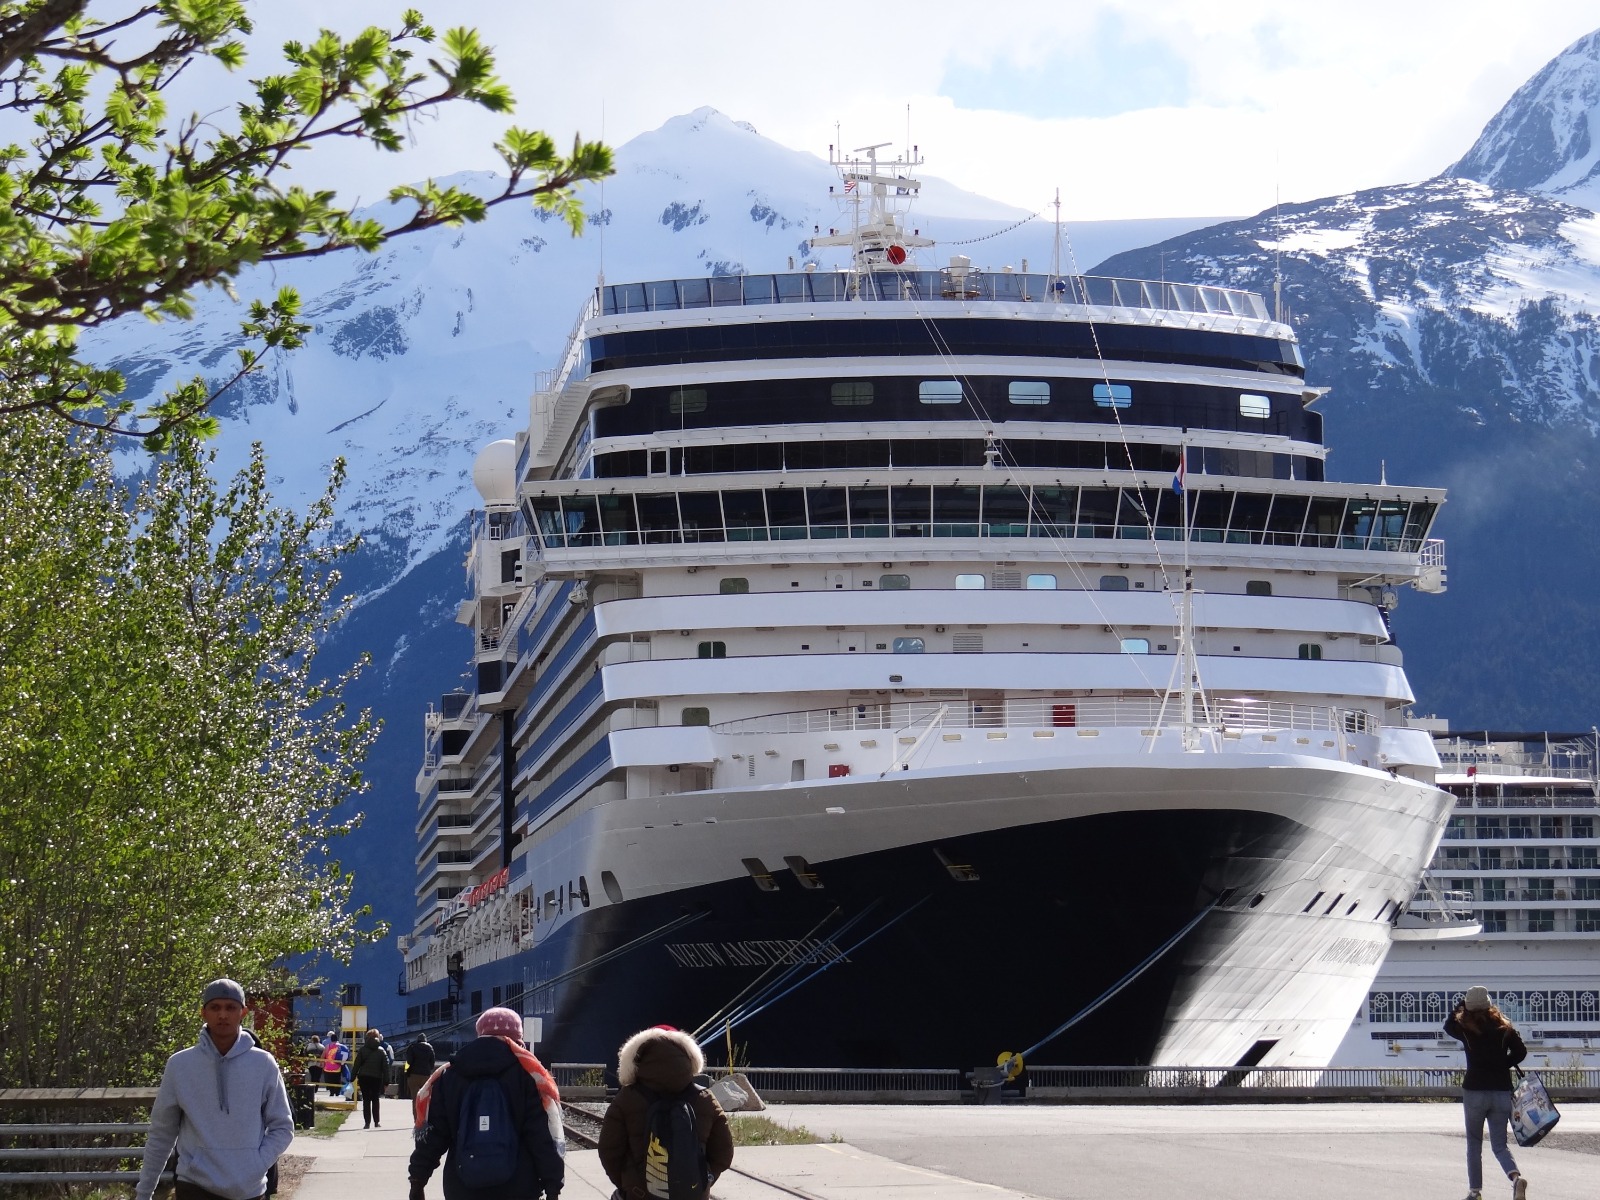 Holland American Line's the Nieuw Amsterdam docked in Alaska / Melody Moser